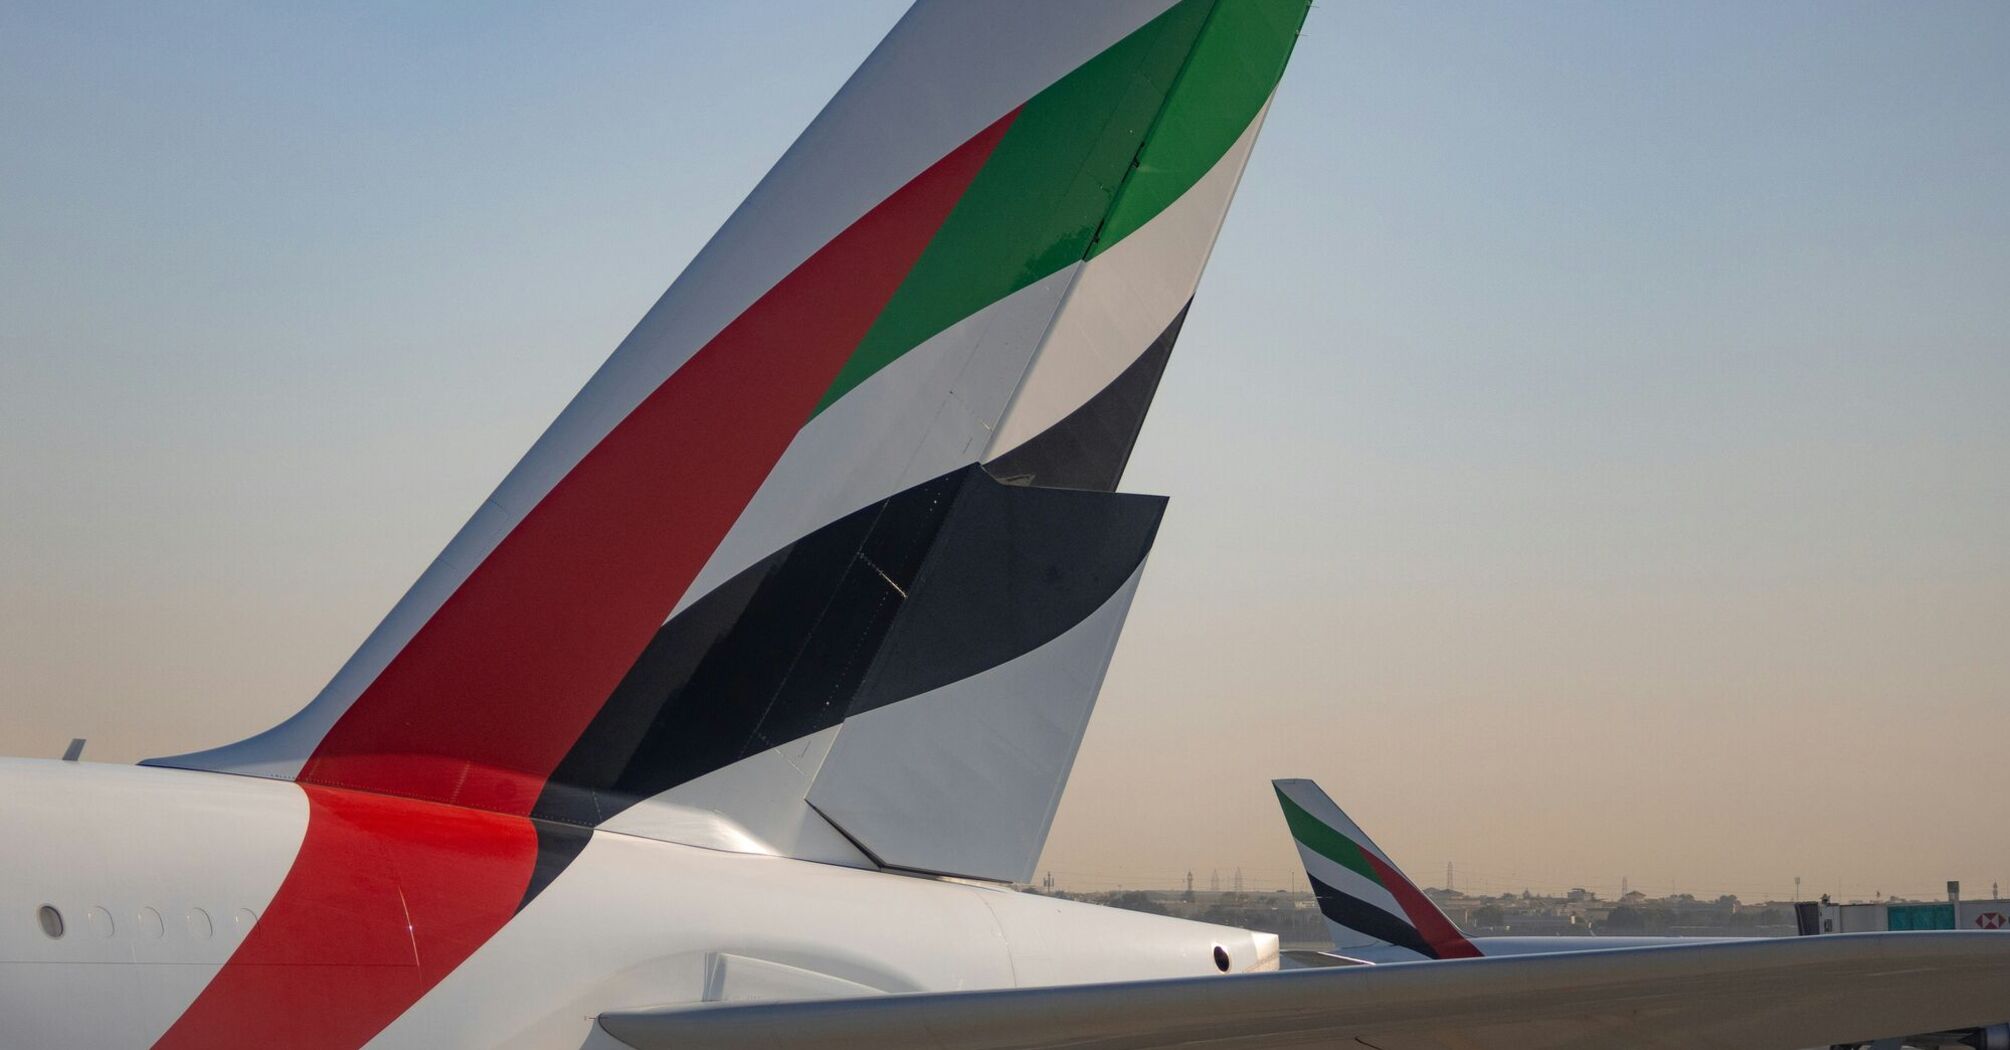 The tail fins of Emirates aircraft showing the distinctive red, green, black, and white design, parked at an airport